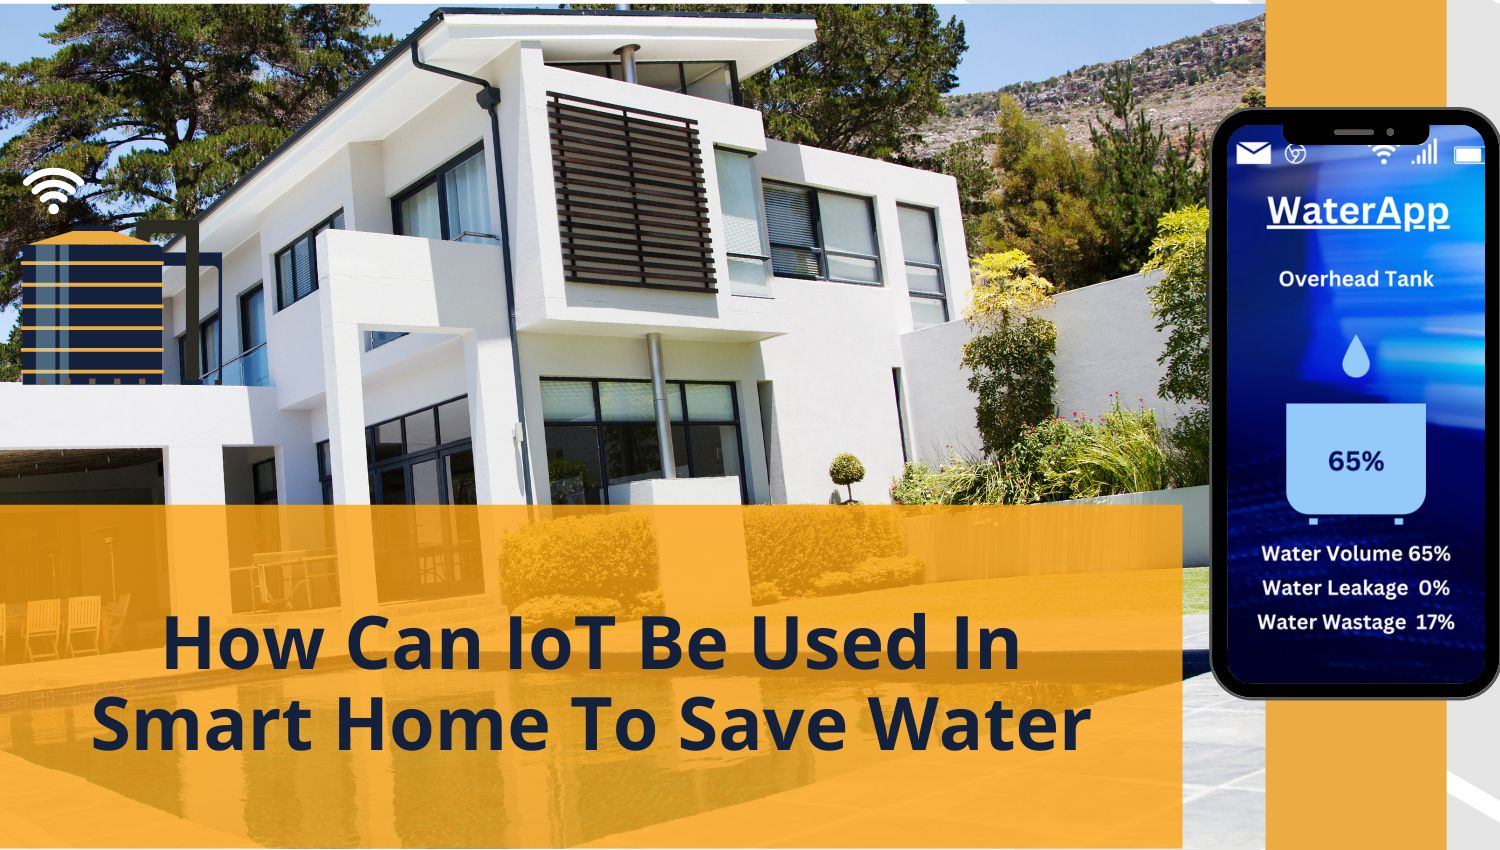 How Can IoT Be Used In Smart Homes To Save Water?